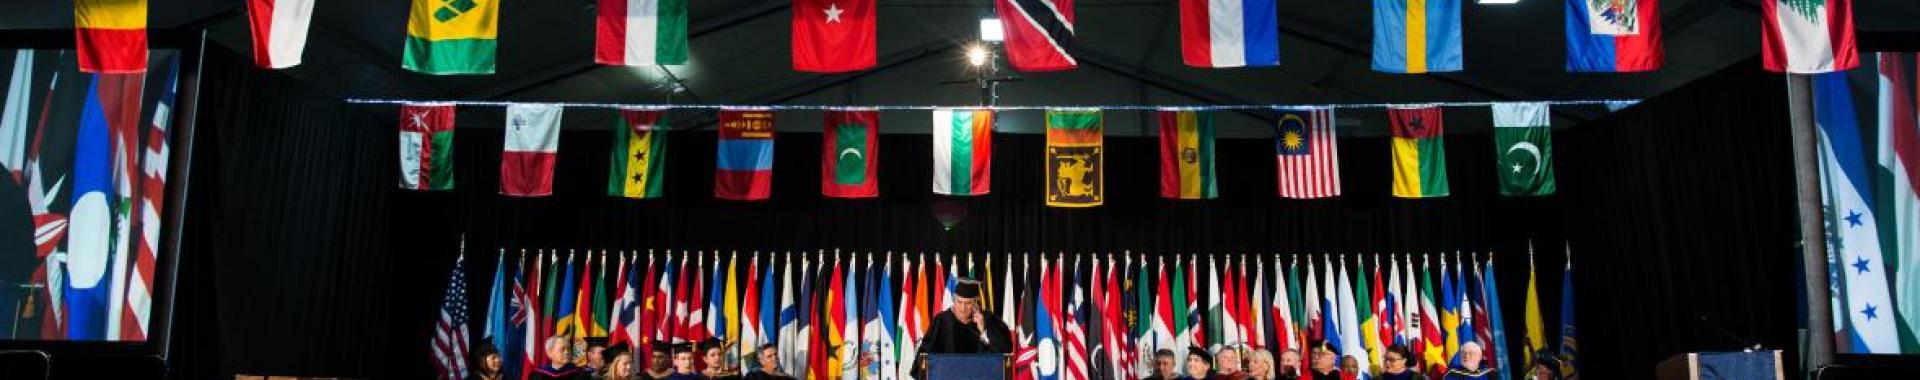 Thunderbird School of Global Management graduation ceremony with the world’s nations flags on display.